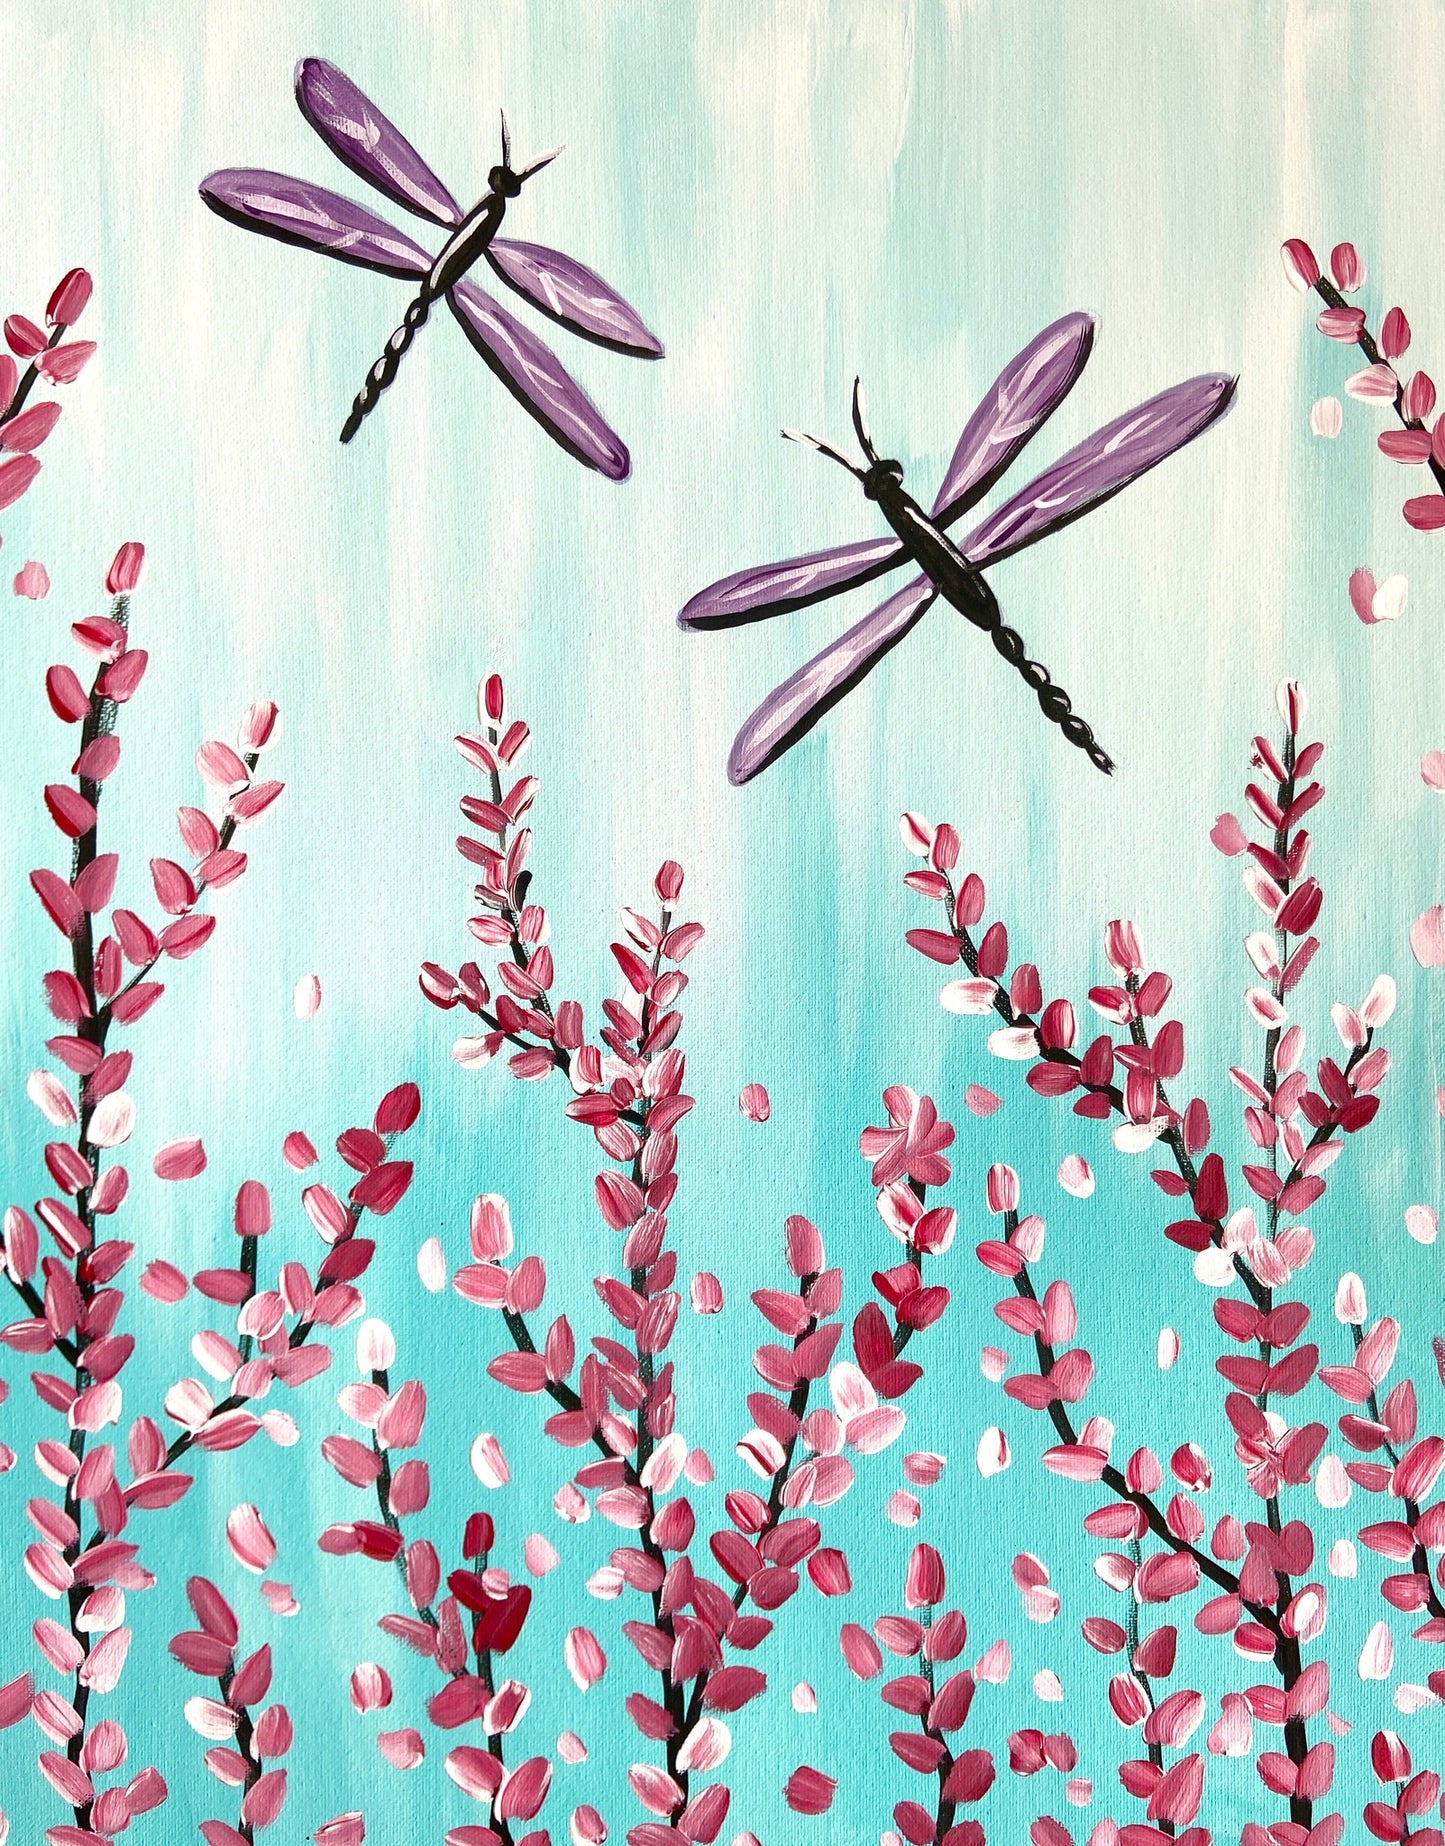 How to paint Spring Dragonflies